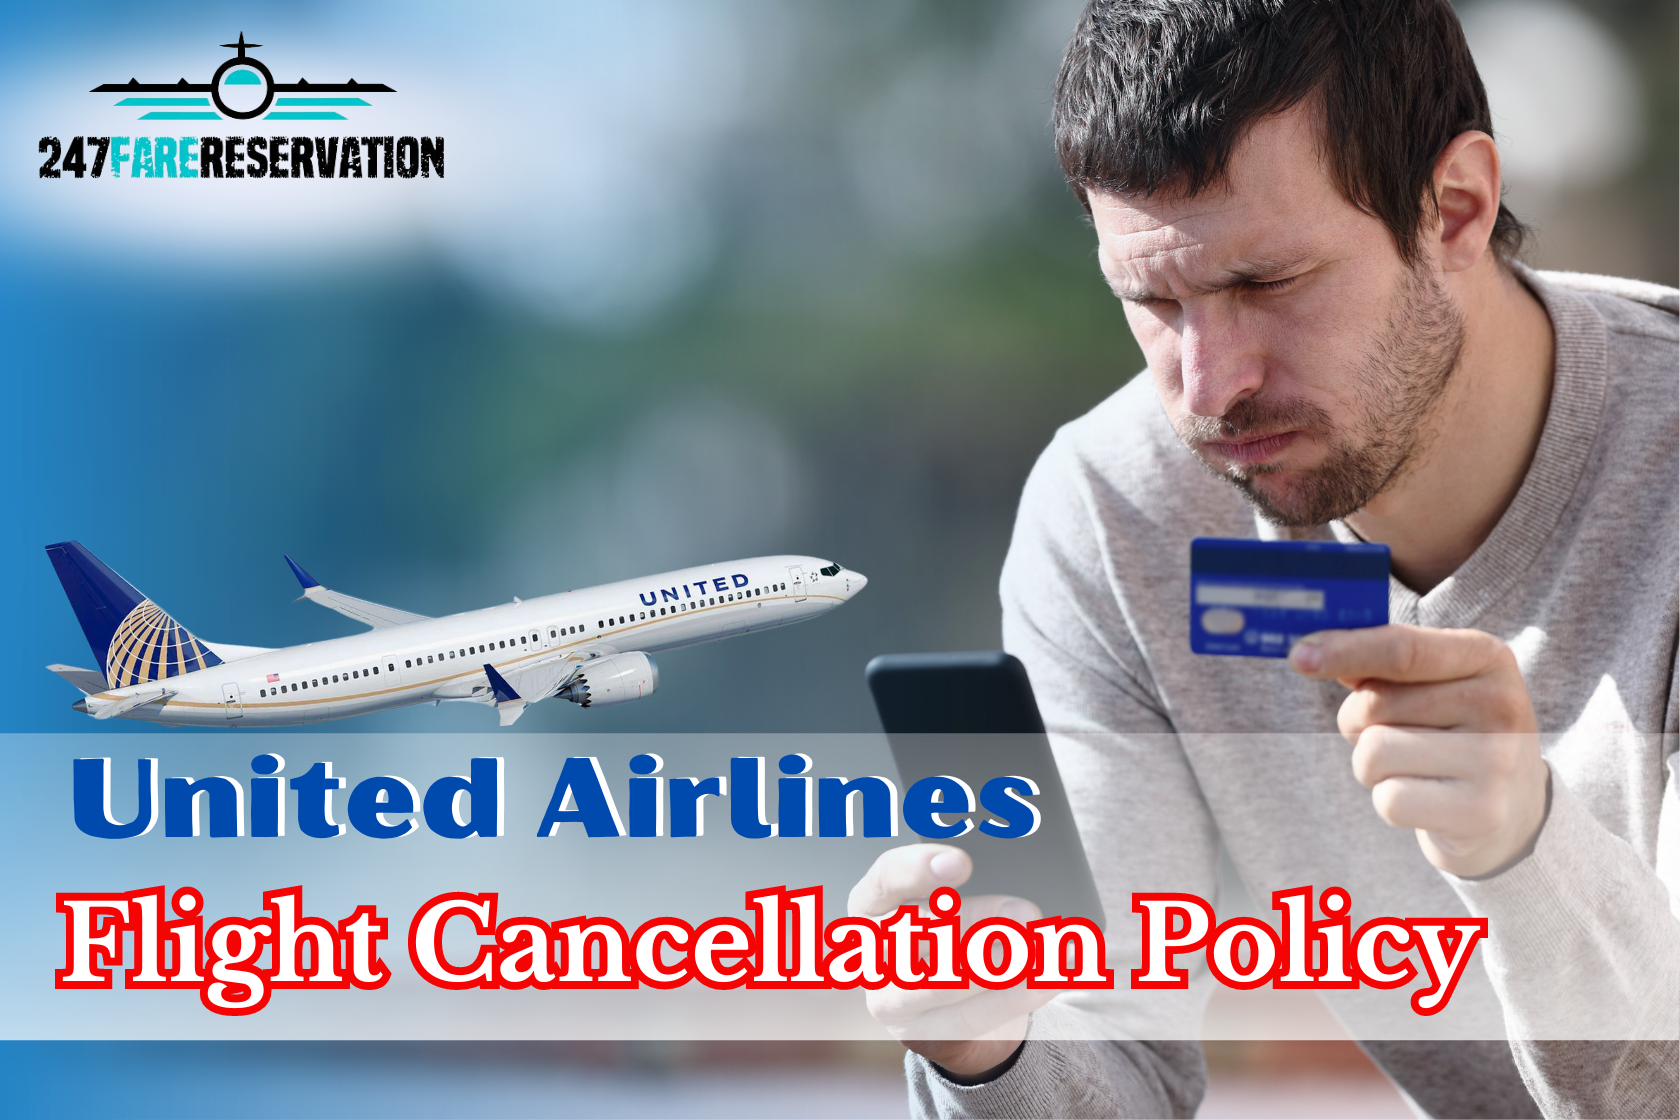 United Airlines Flight Cancellation Policy » 247farereservation - Latest News & Blogs